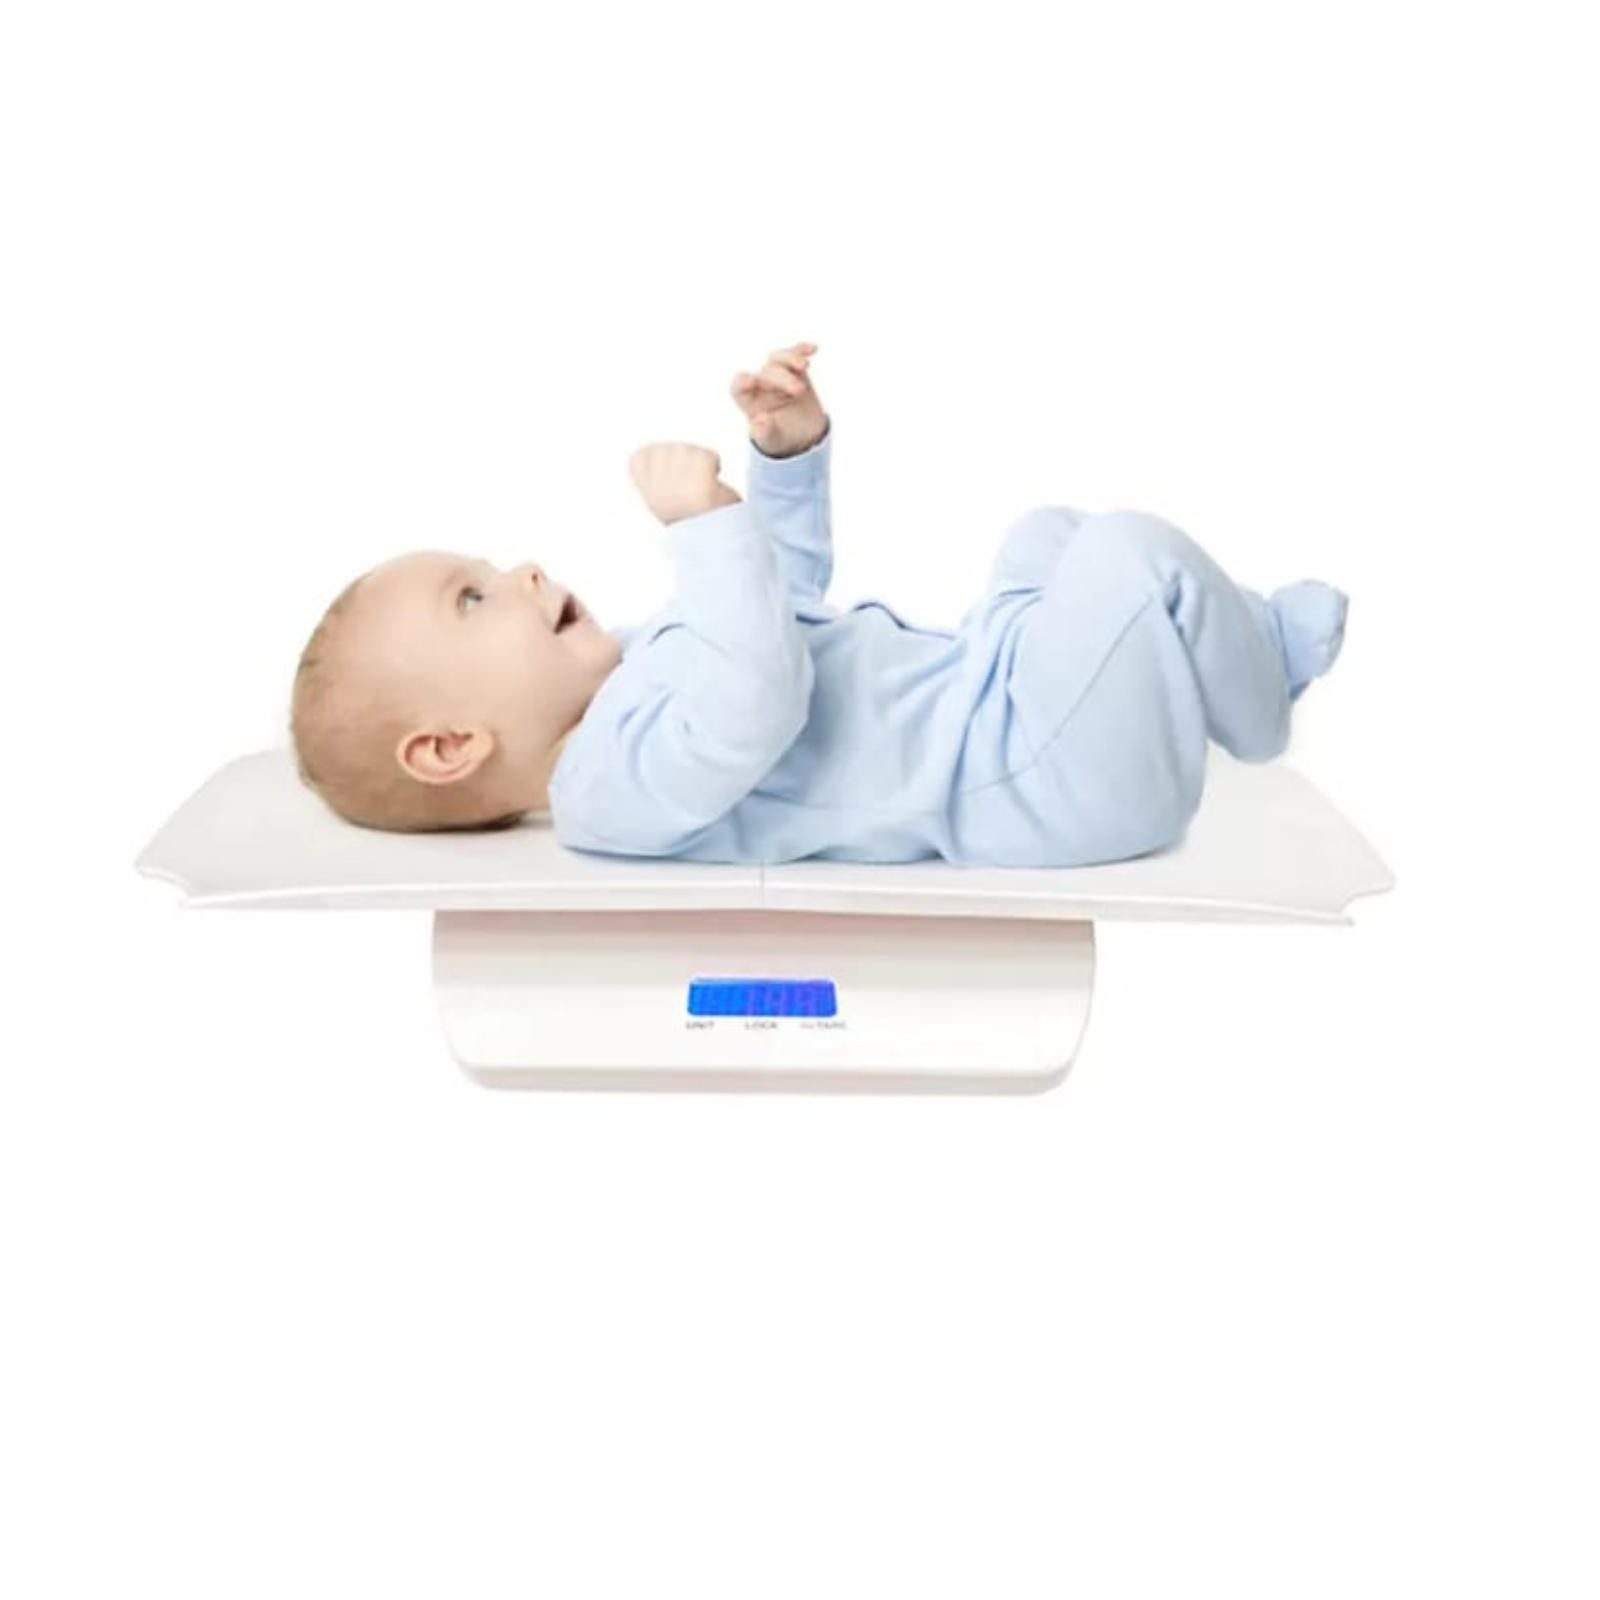 100 kg Digital Electronic Adult / Baby Weighing Scale KS 810